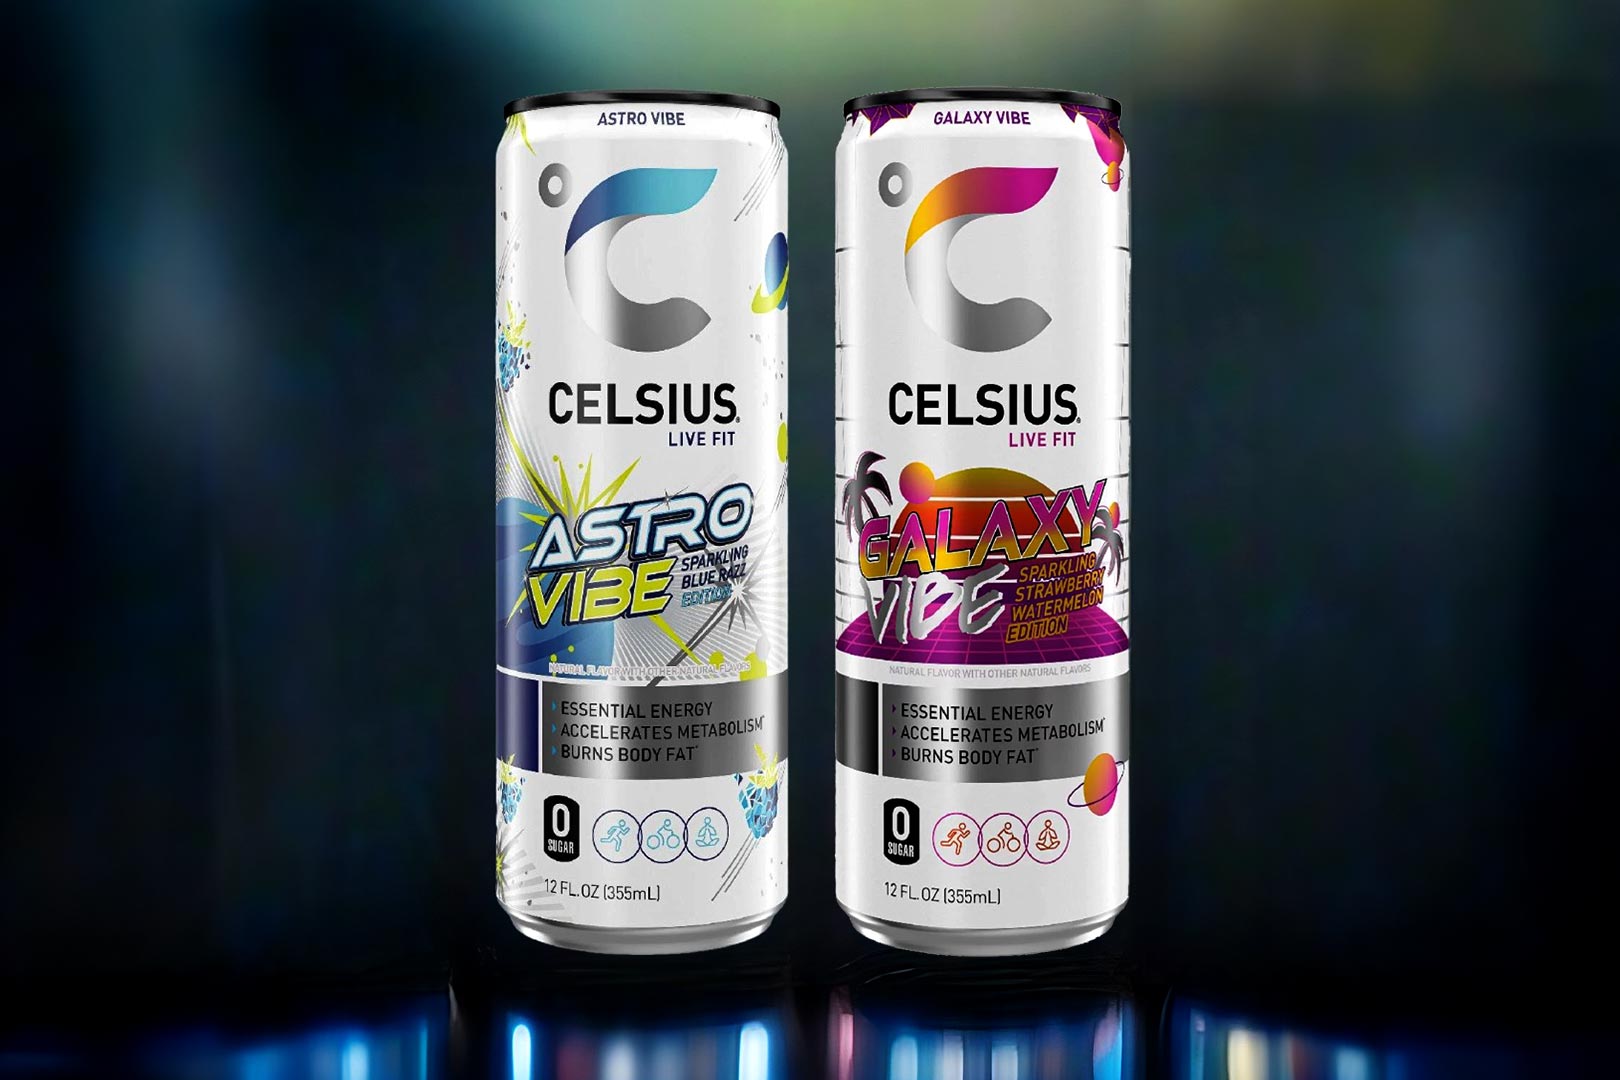 Celsius set to continue its Vibe Series of flavors in Astro Vibe and Galaxy Vibe